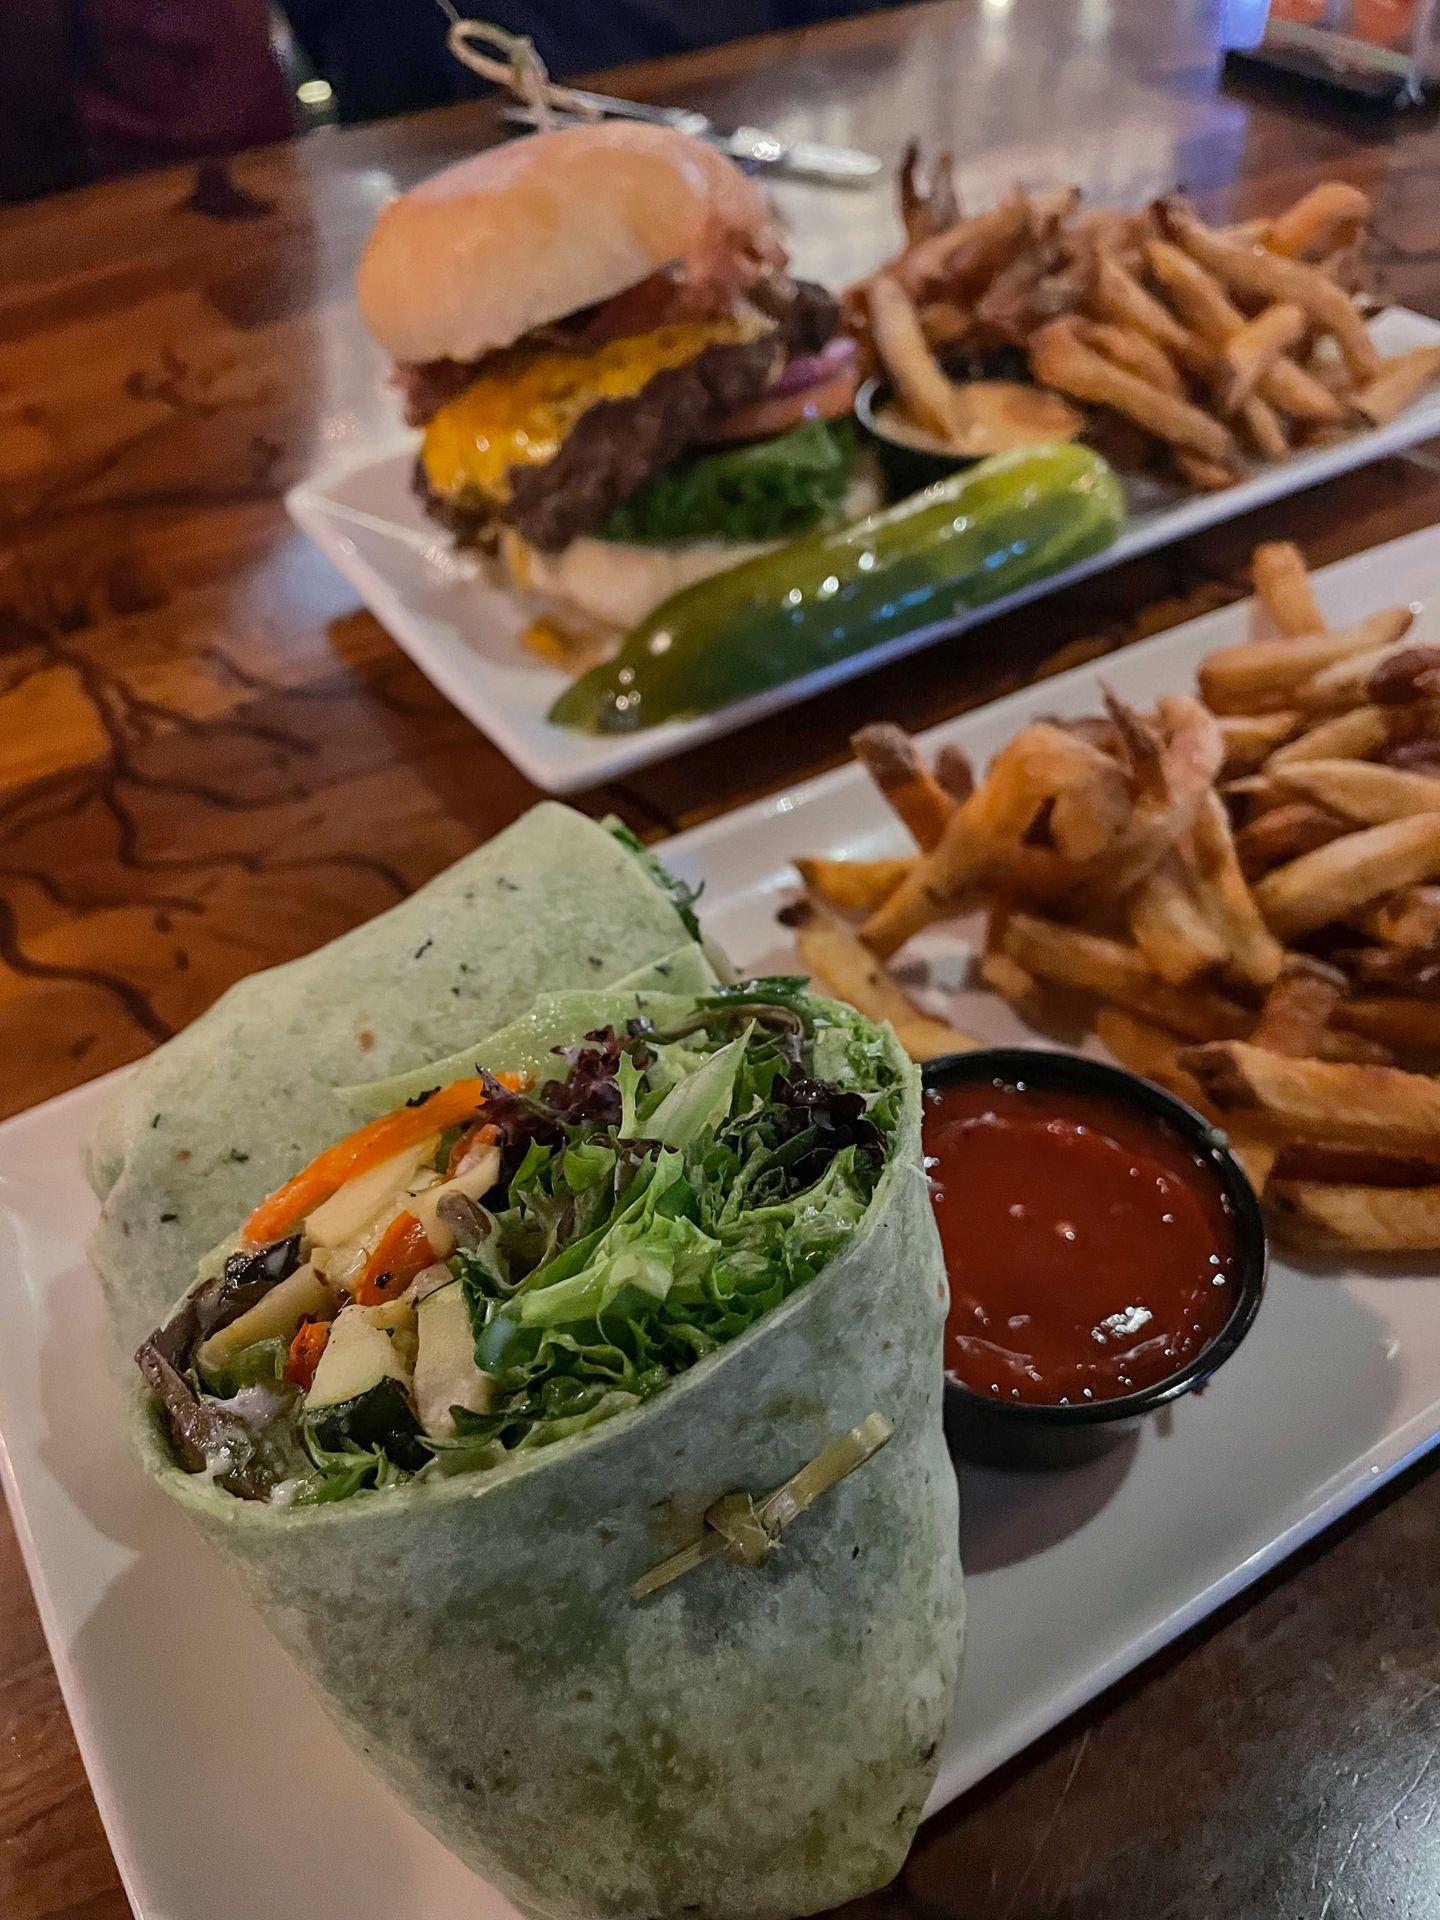 A plate of green wrap next to french fries. In the background there is a plate with a burger and fries.